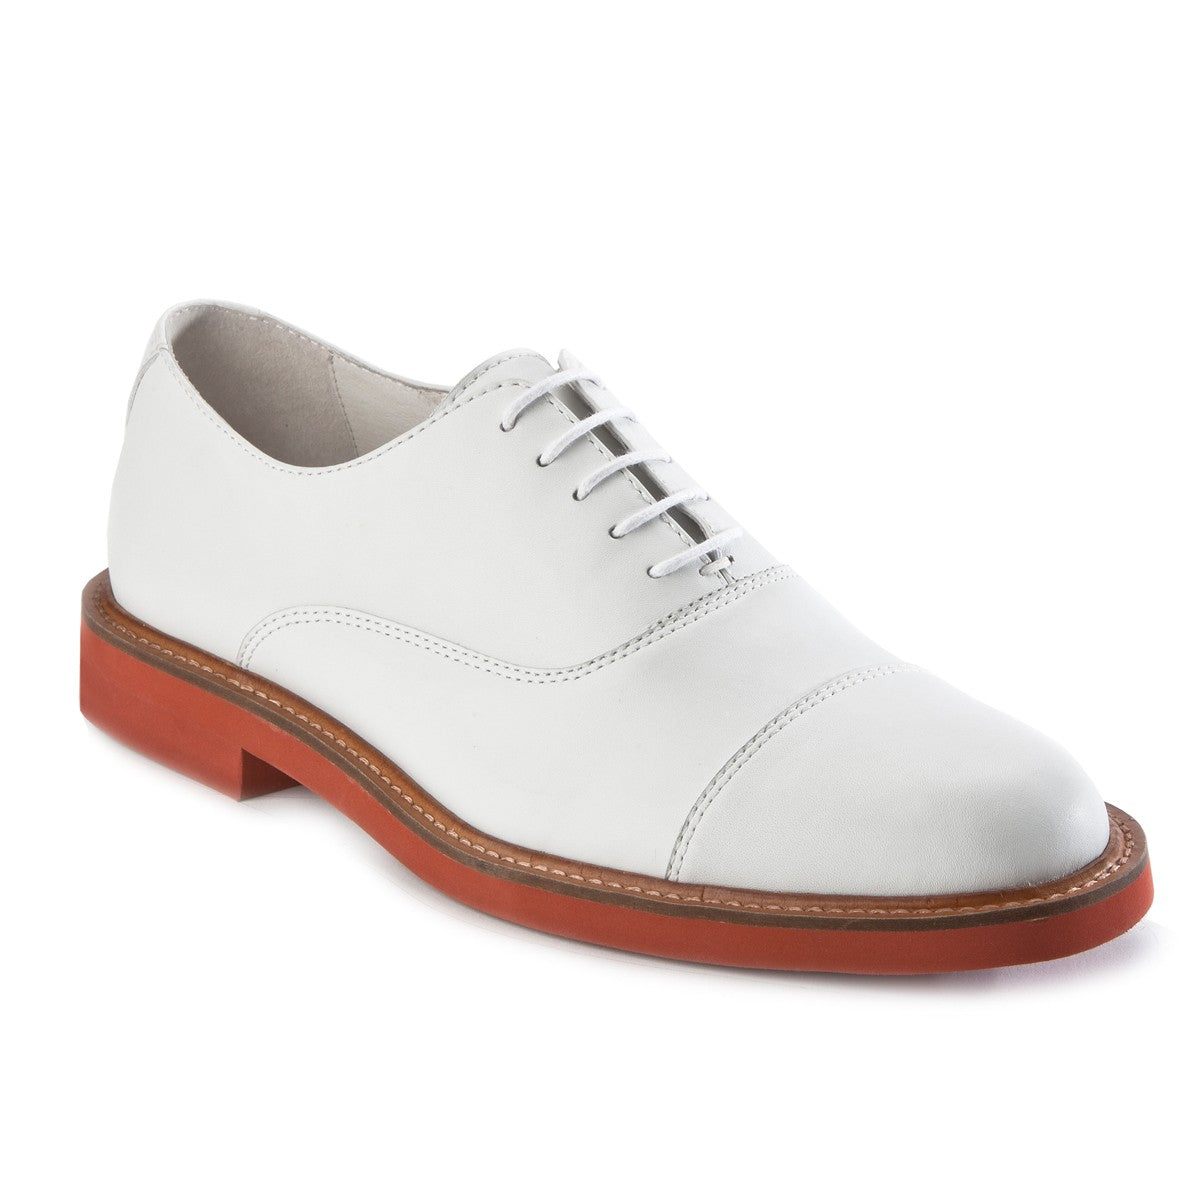 Mens white leather oxford lace-up shoes